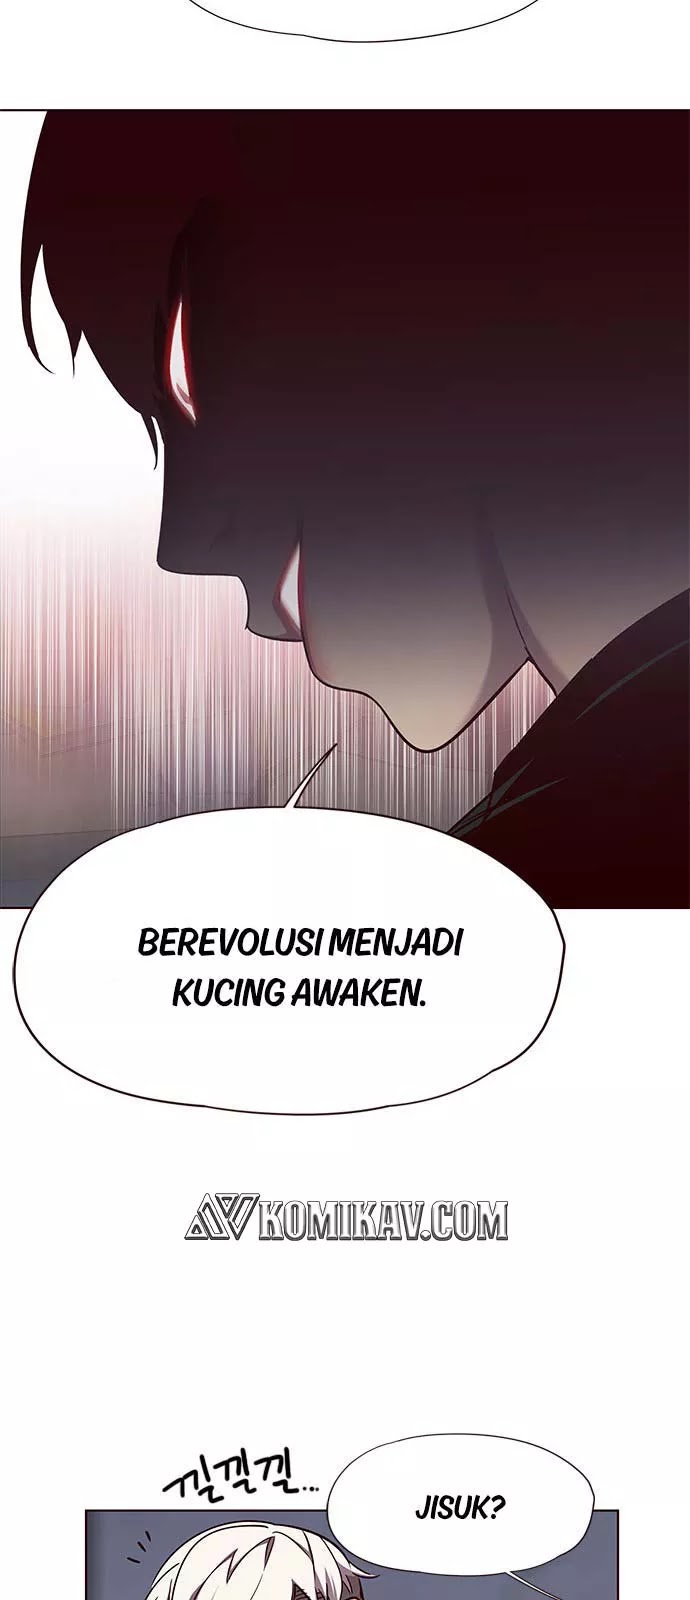 Eleceed Chapter 55